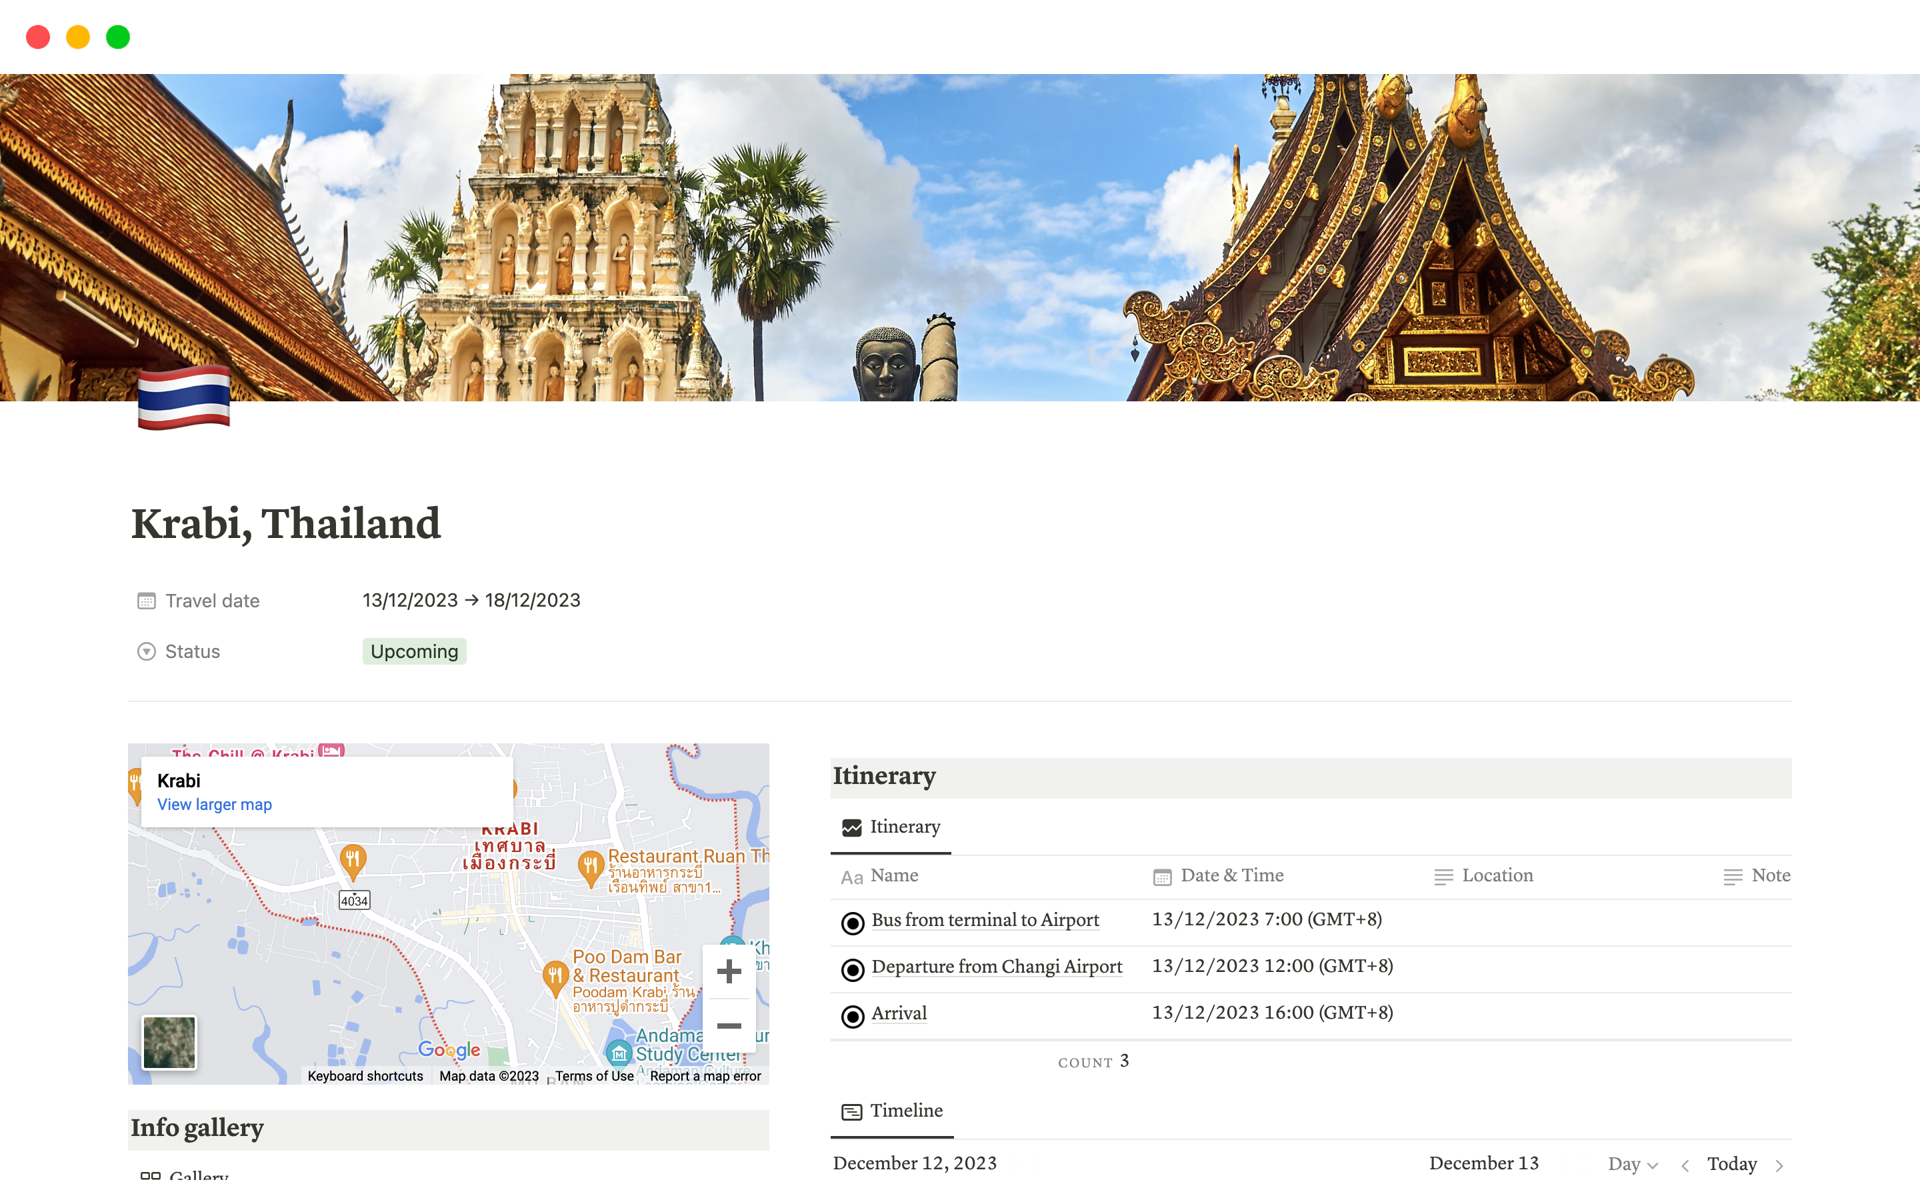 The Notion travel planner simplifies the process of organizing trips by offering a comprehensive platform to manage itineraries, reservations, packing lists, and travel expenses in one place